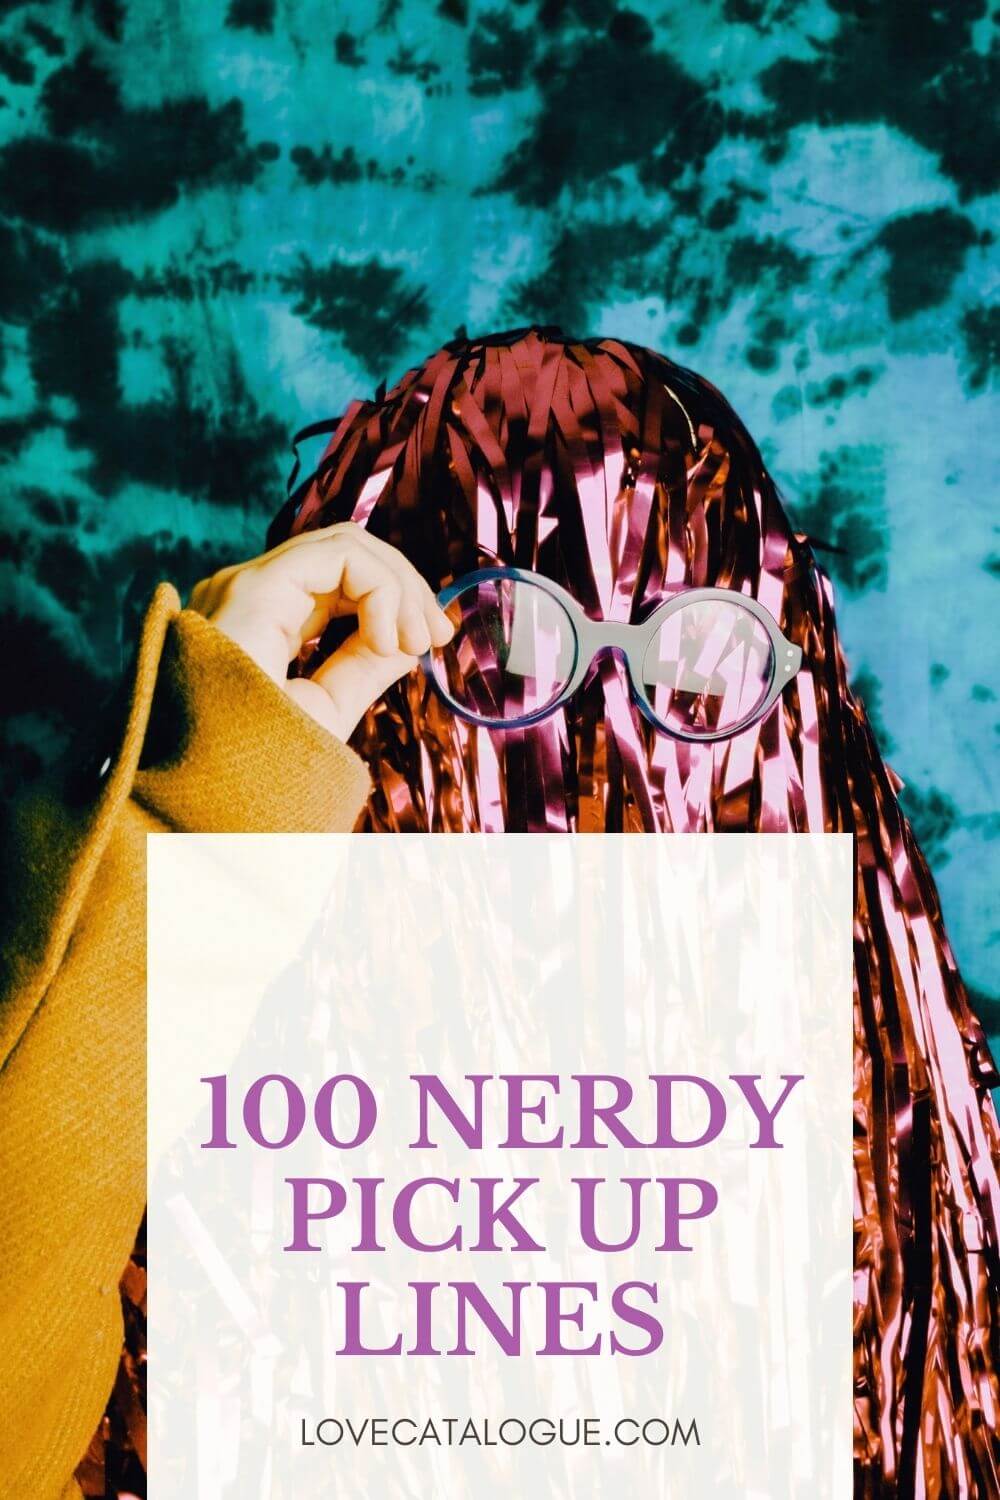 Up nerdy lines chat Geeky Pick